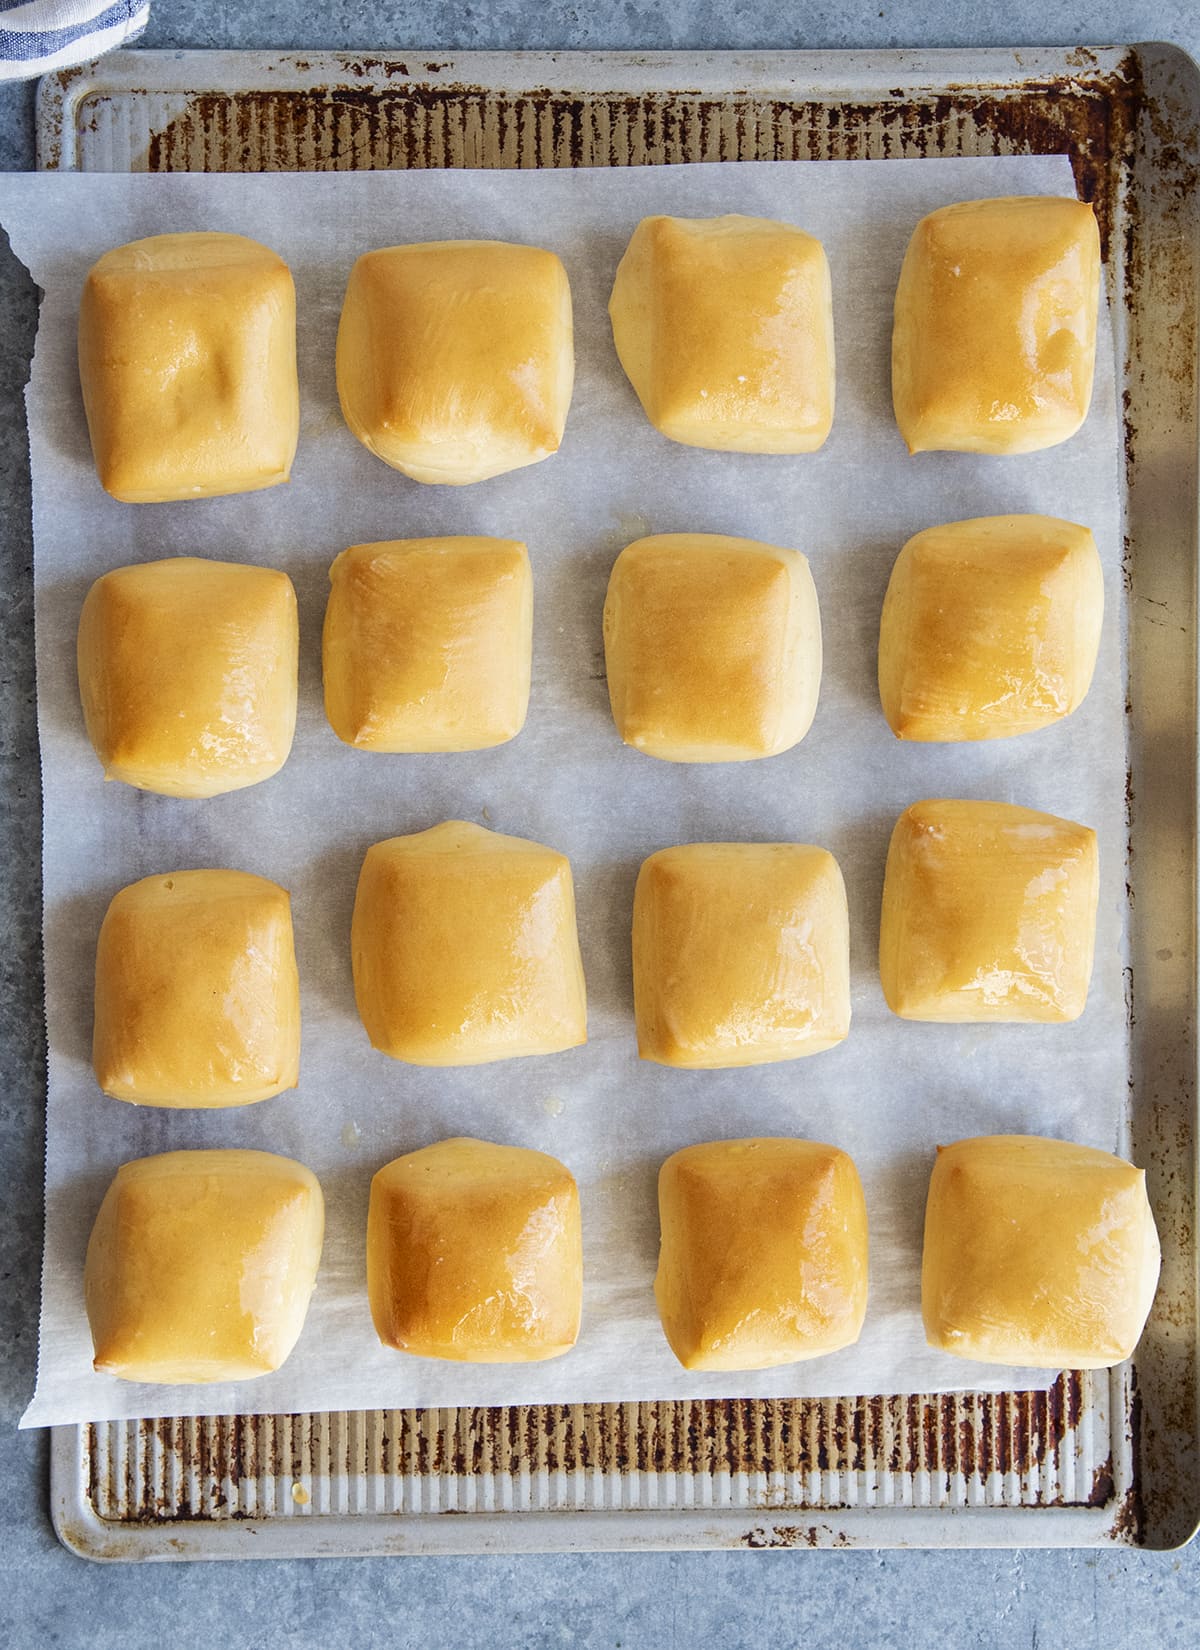 Rows of golden square Texas Roadhouse style rolls on a baking sheet.